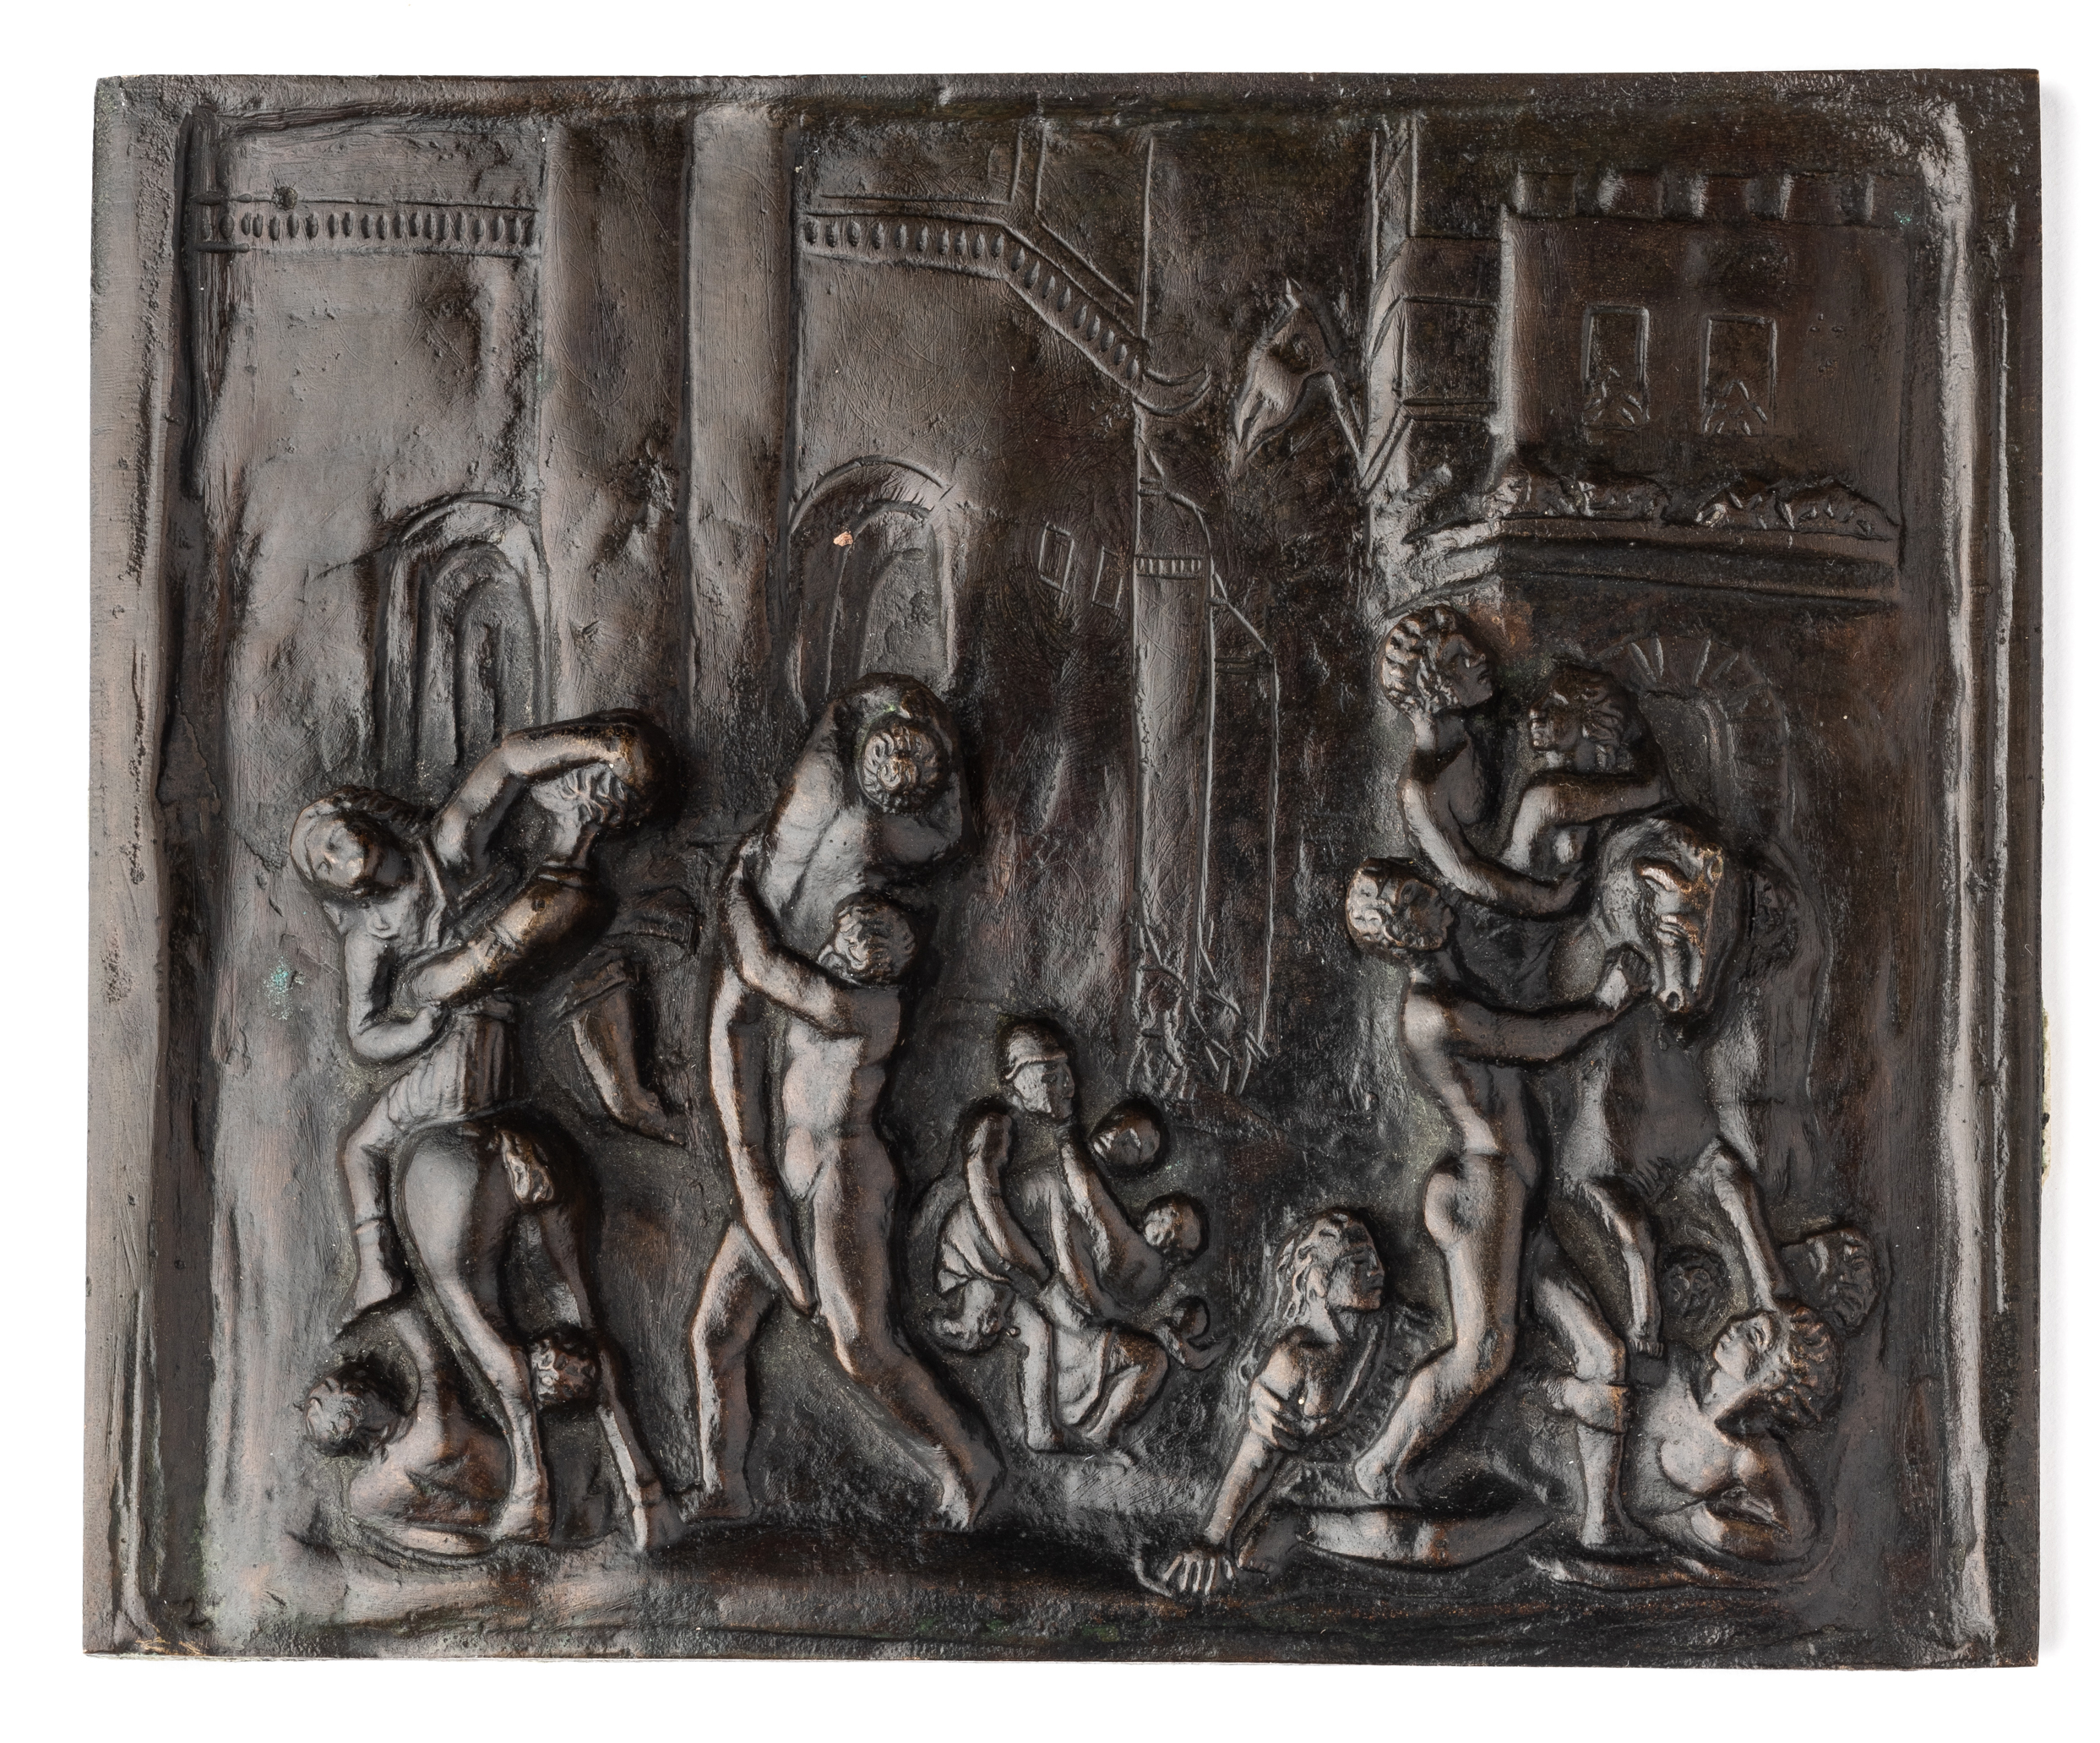 □ A BRONZE PLAQUETTE OF THE RAPE OF THE SABINE WOMEN, AFTER GIAMBOLOGNA (1529-1608), PERHAPS GERMAN